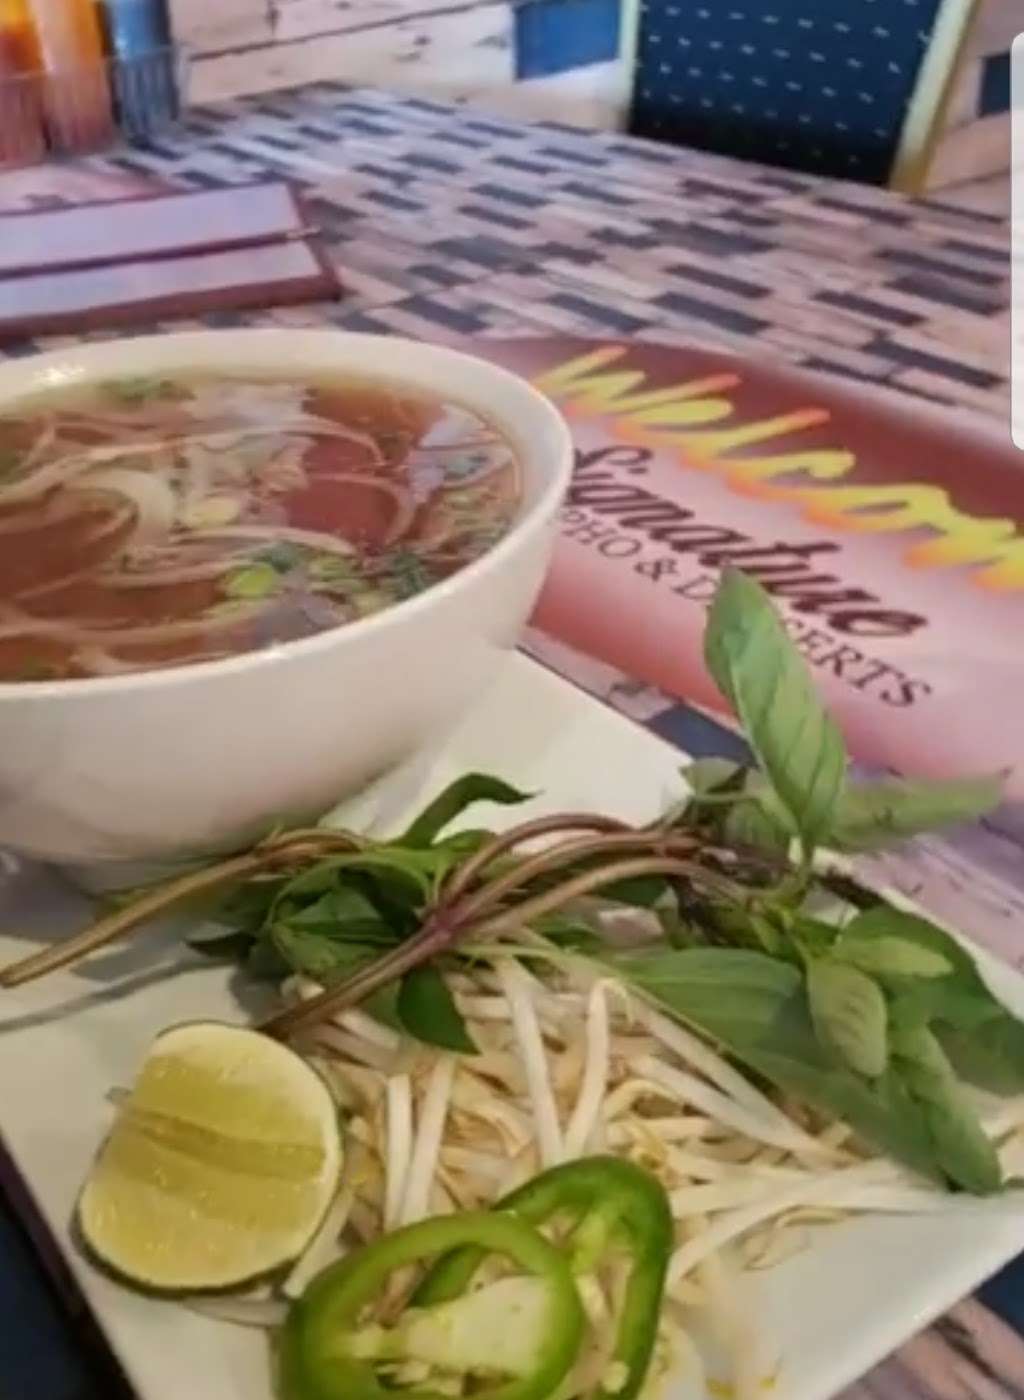 Signature Pho & Desserts | 17600 Collier Ave # A102, Lake Elsinore, CA 92530 | Phone: (951) 228-2888